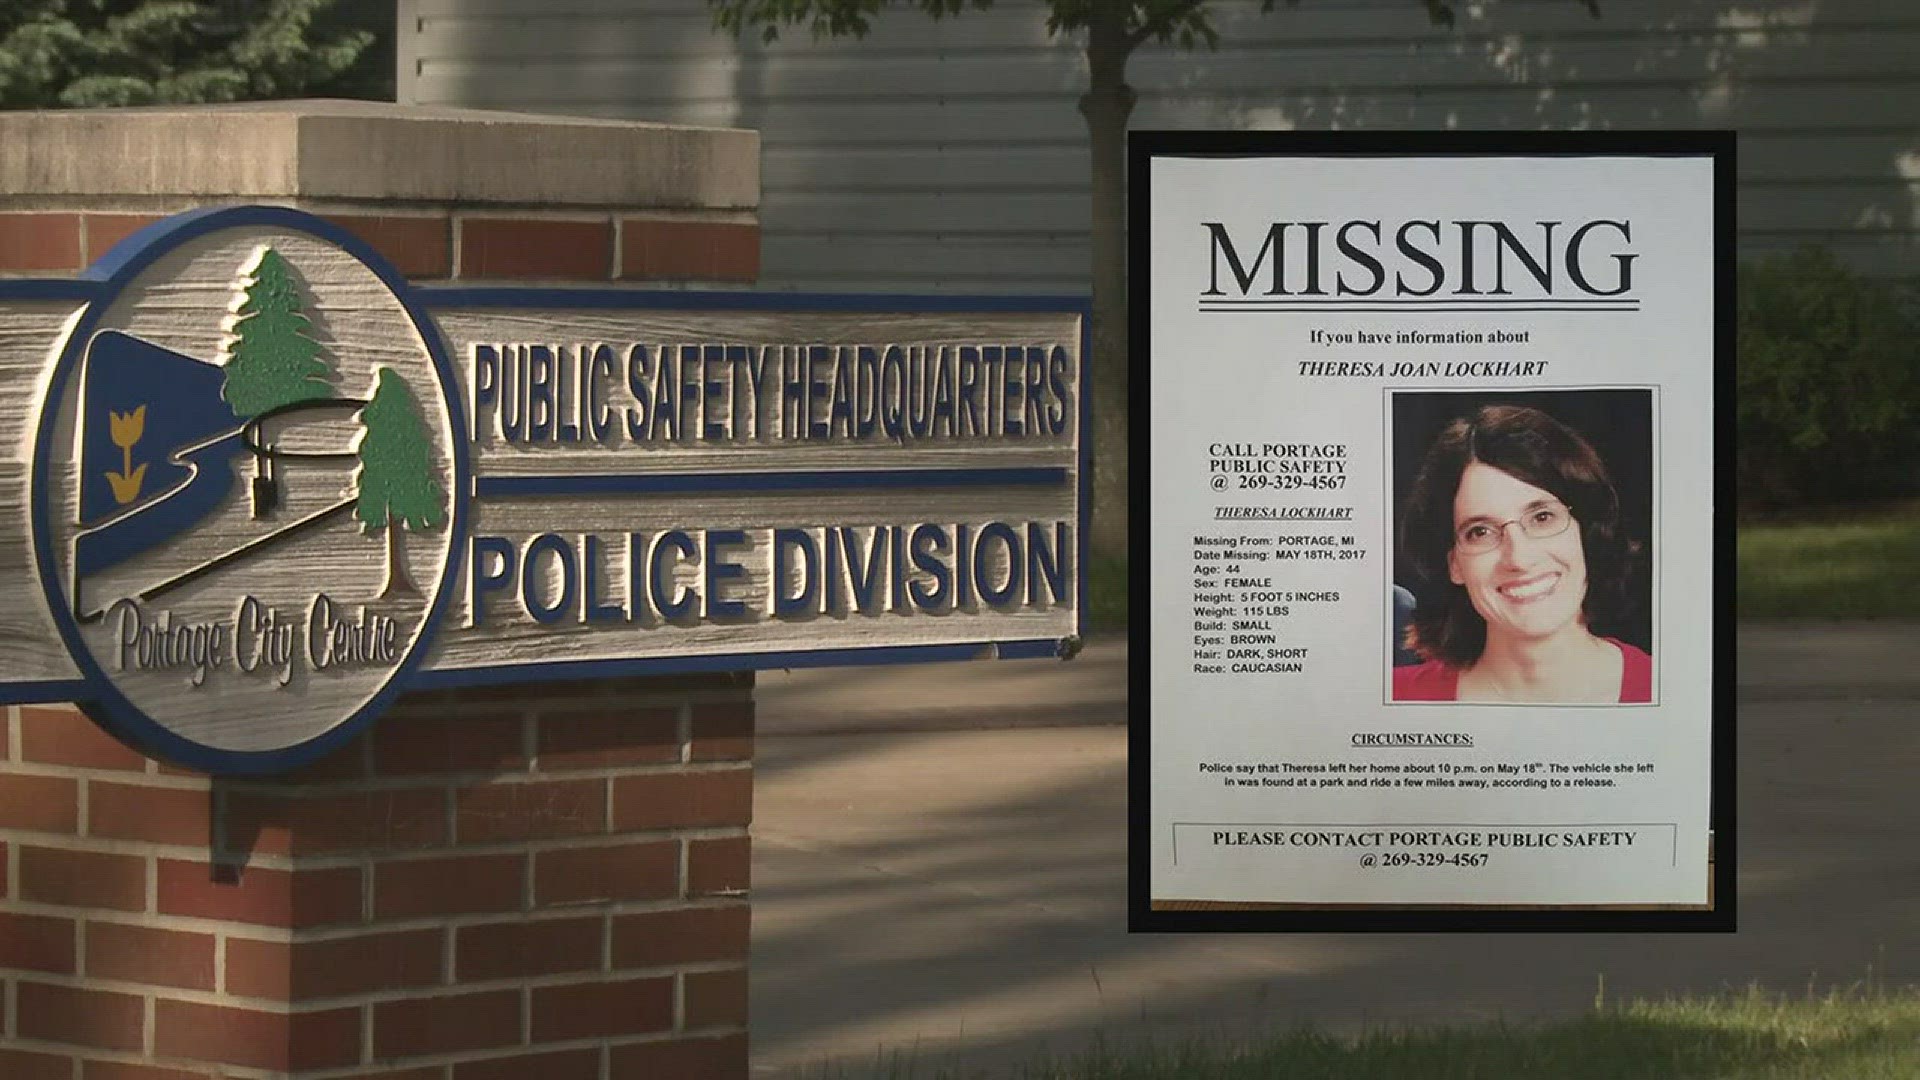 They were going through a rough patch, friend of missing Portage woman speaks wzzm13 picture